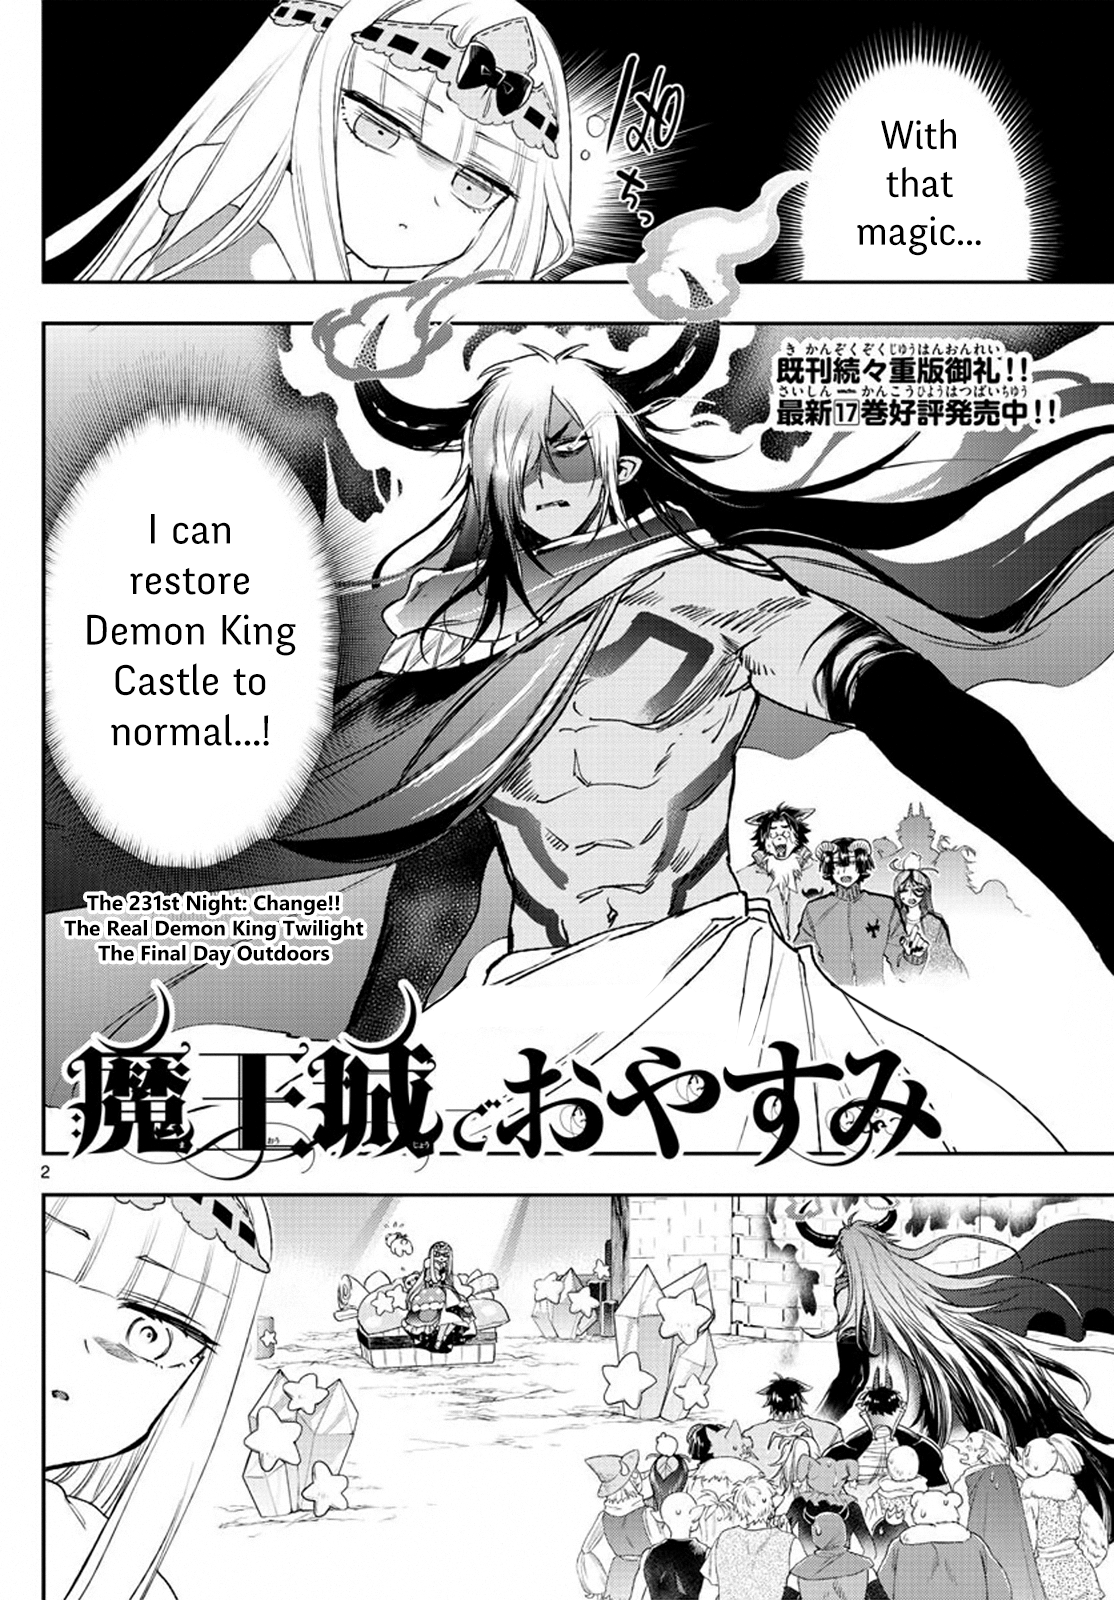 Maou-Jou De Oyasumi Chapter 231: Change!! The Real Demon King Twilight - The Final Day Outdoors - Picture 2